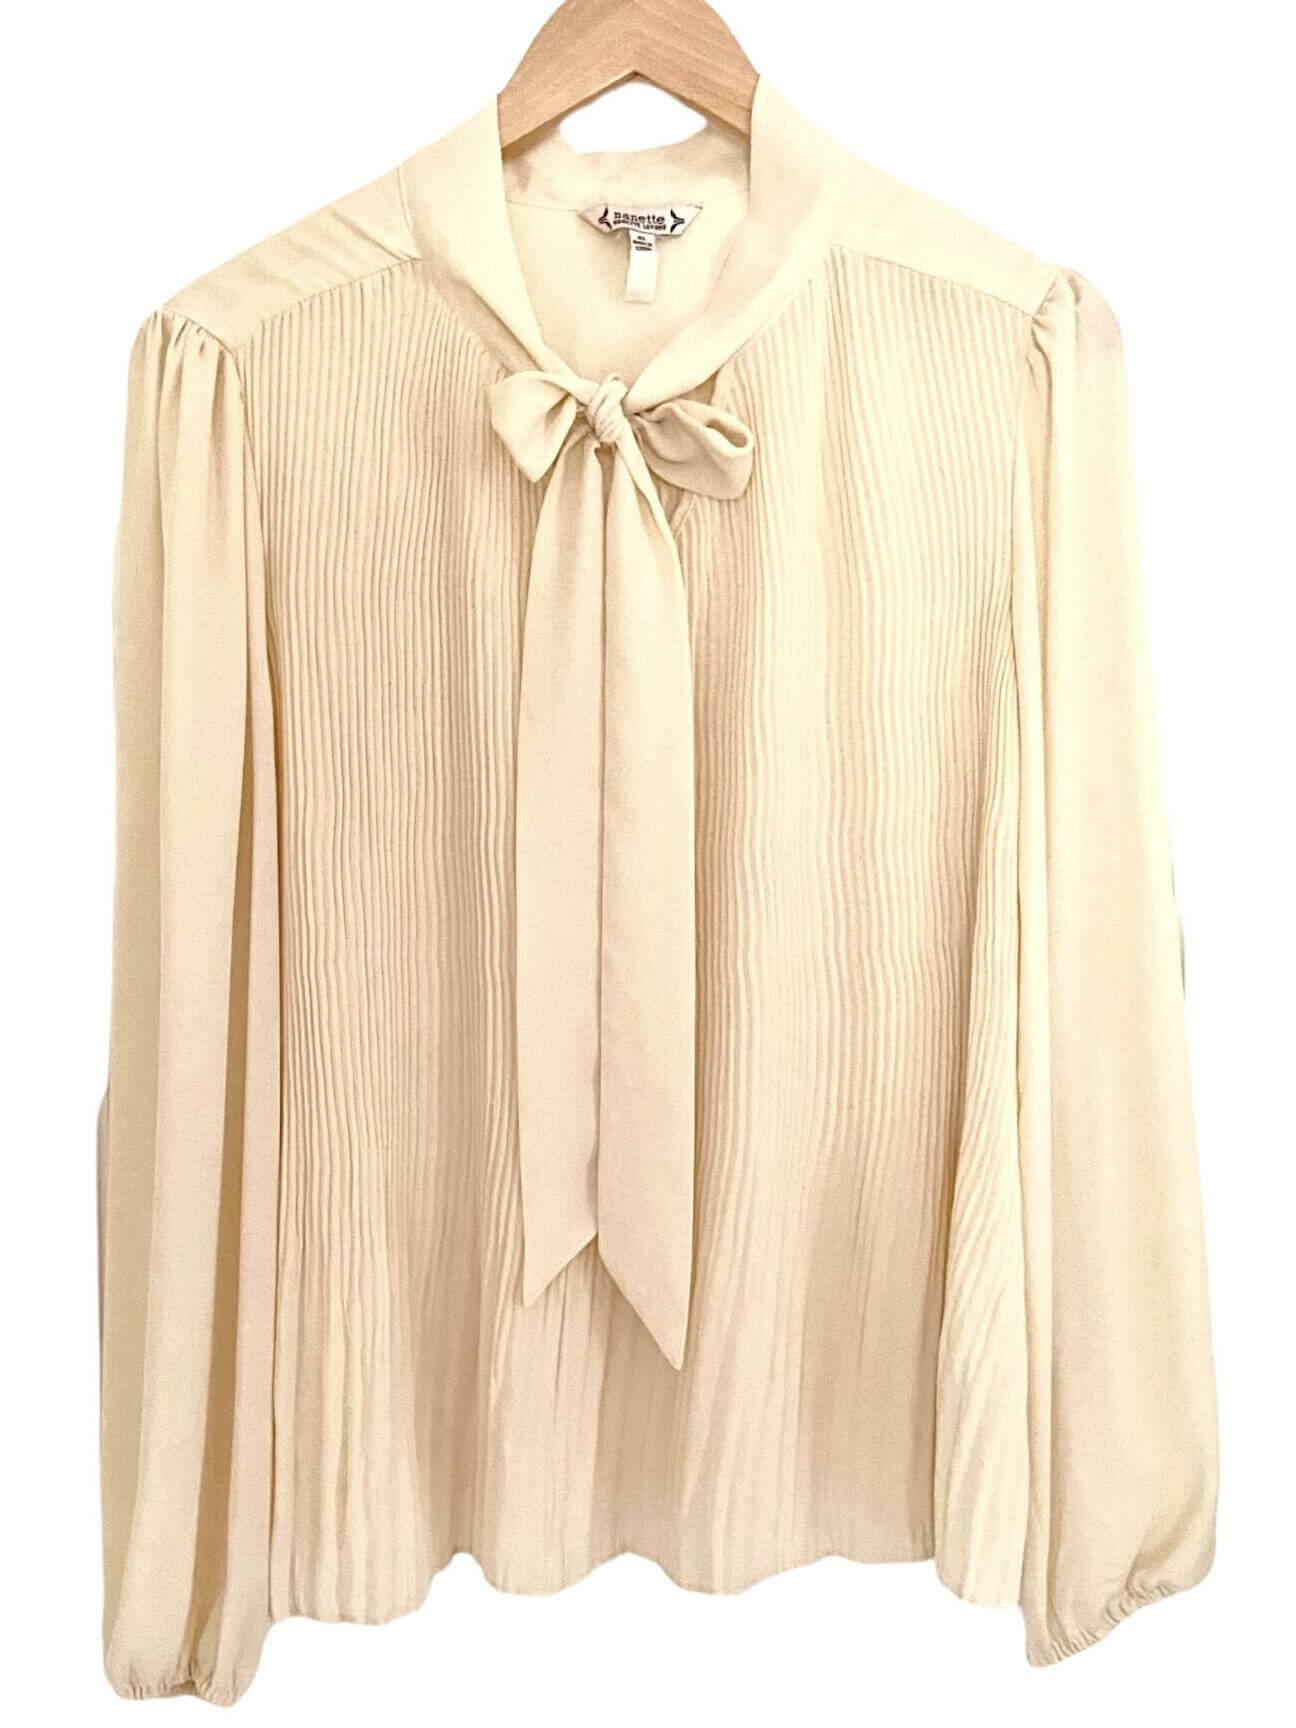 Bright Spring NANETTE LEPORE pleated bow blouse